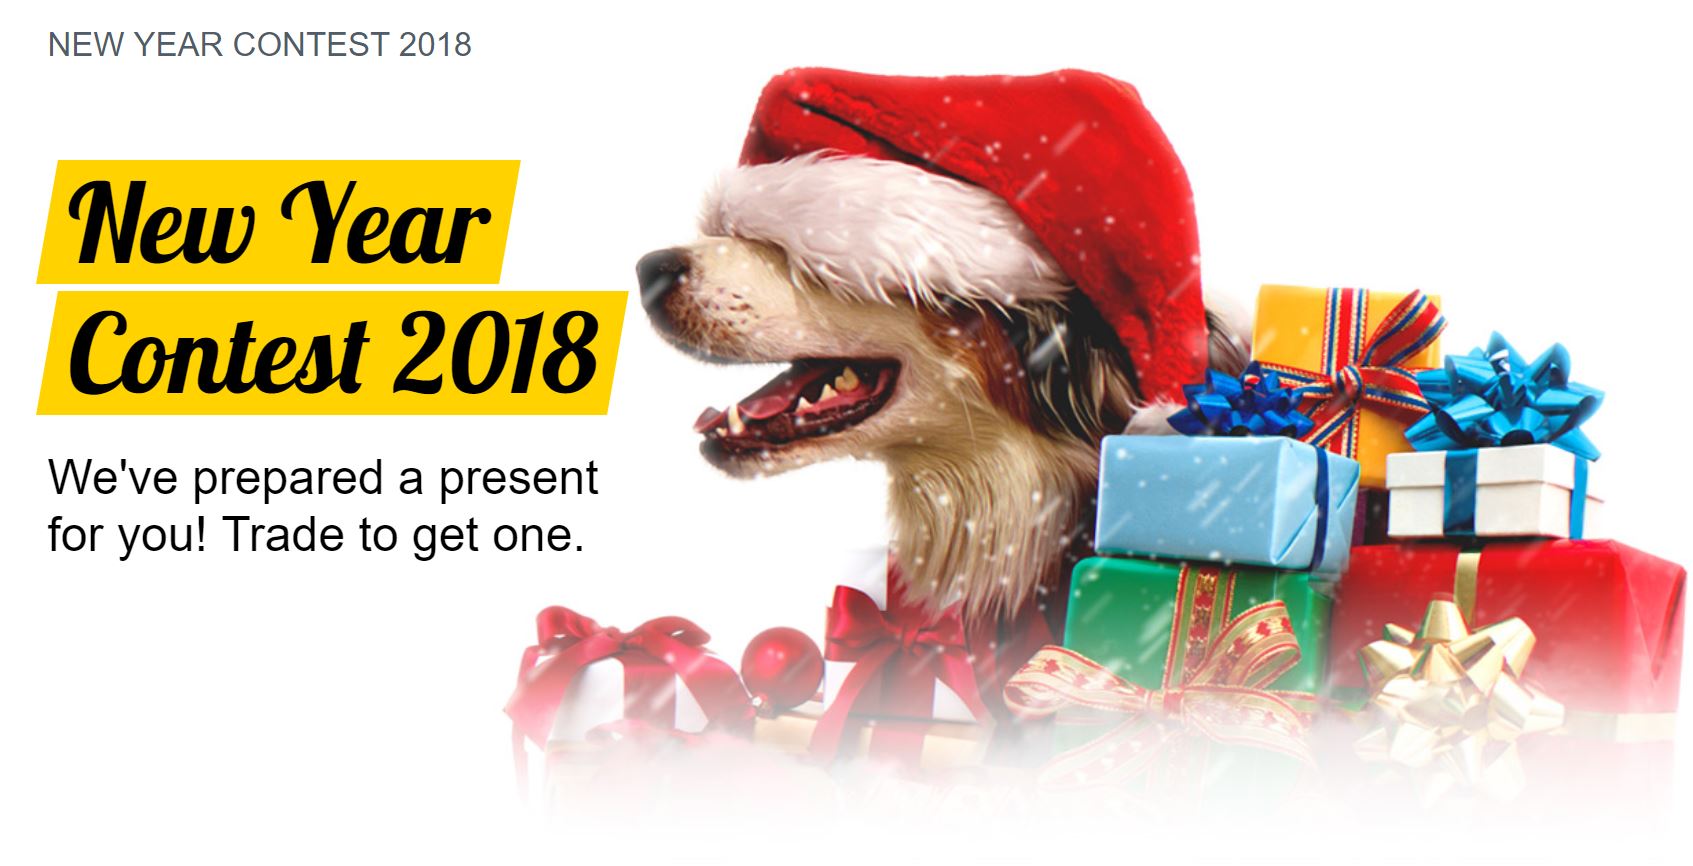 JustForex – New Year MT4 Contest 2018 to get up to $3,000 ...